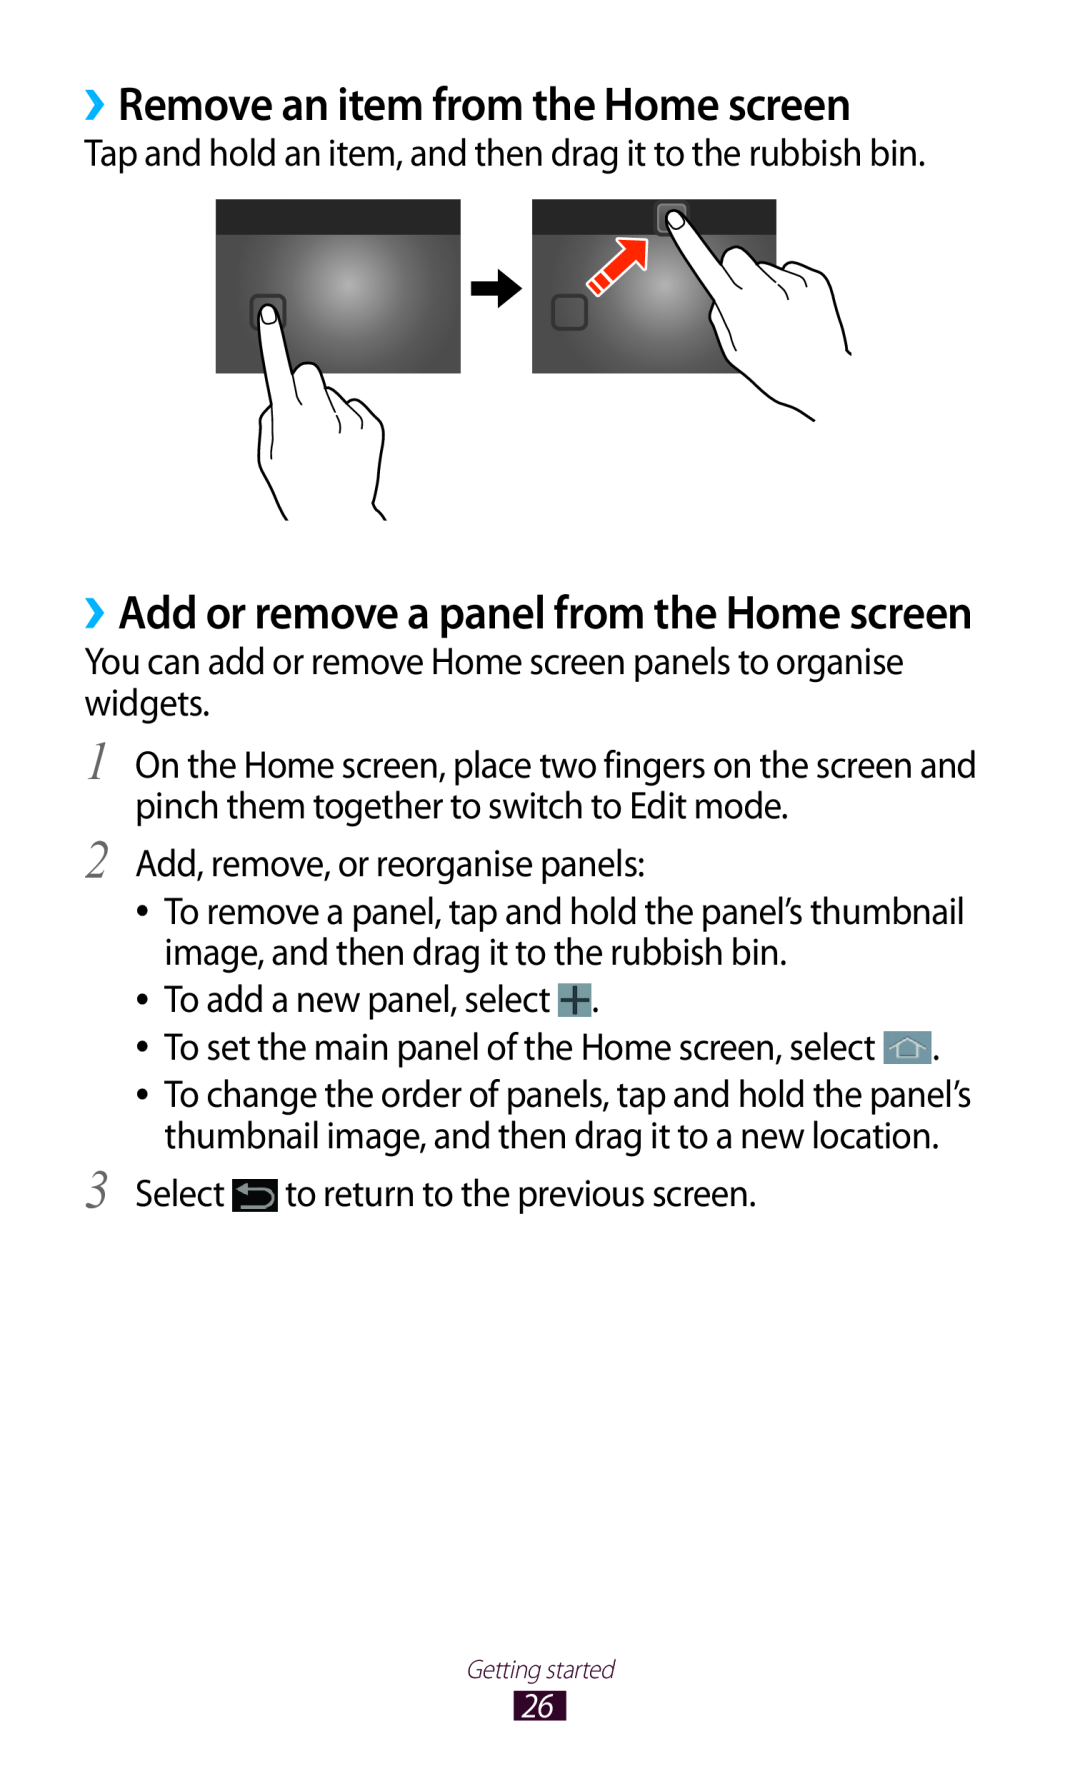 Samsung GT-P7500FKDFTM, GT-P7500UWEDBT ››Remove an item from the Home screen, ››Add or remove a panel from the Home screen 